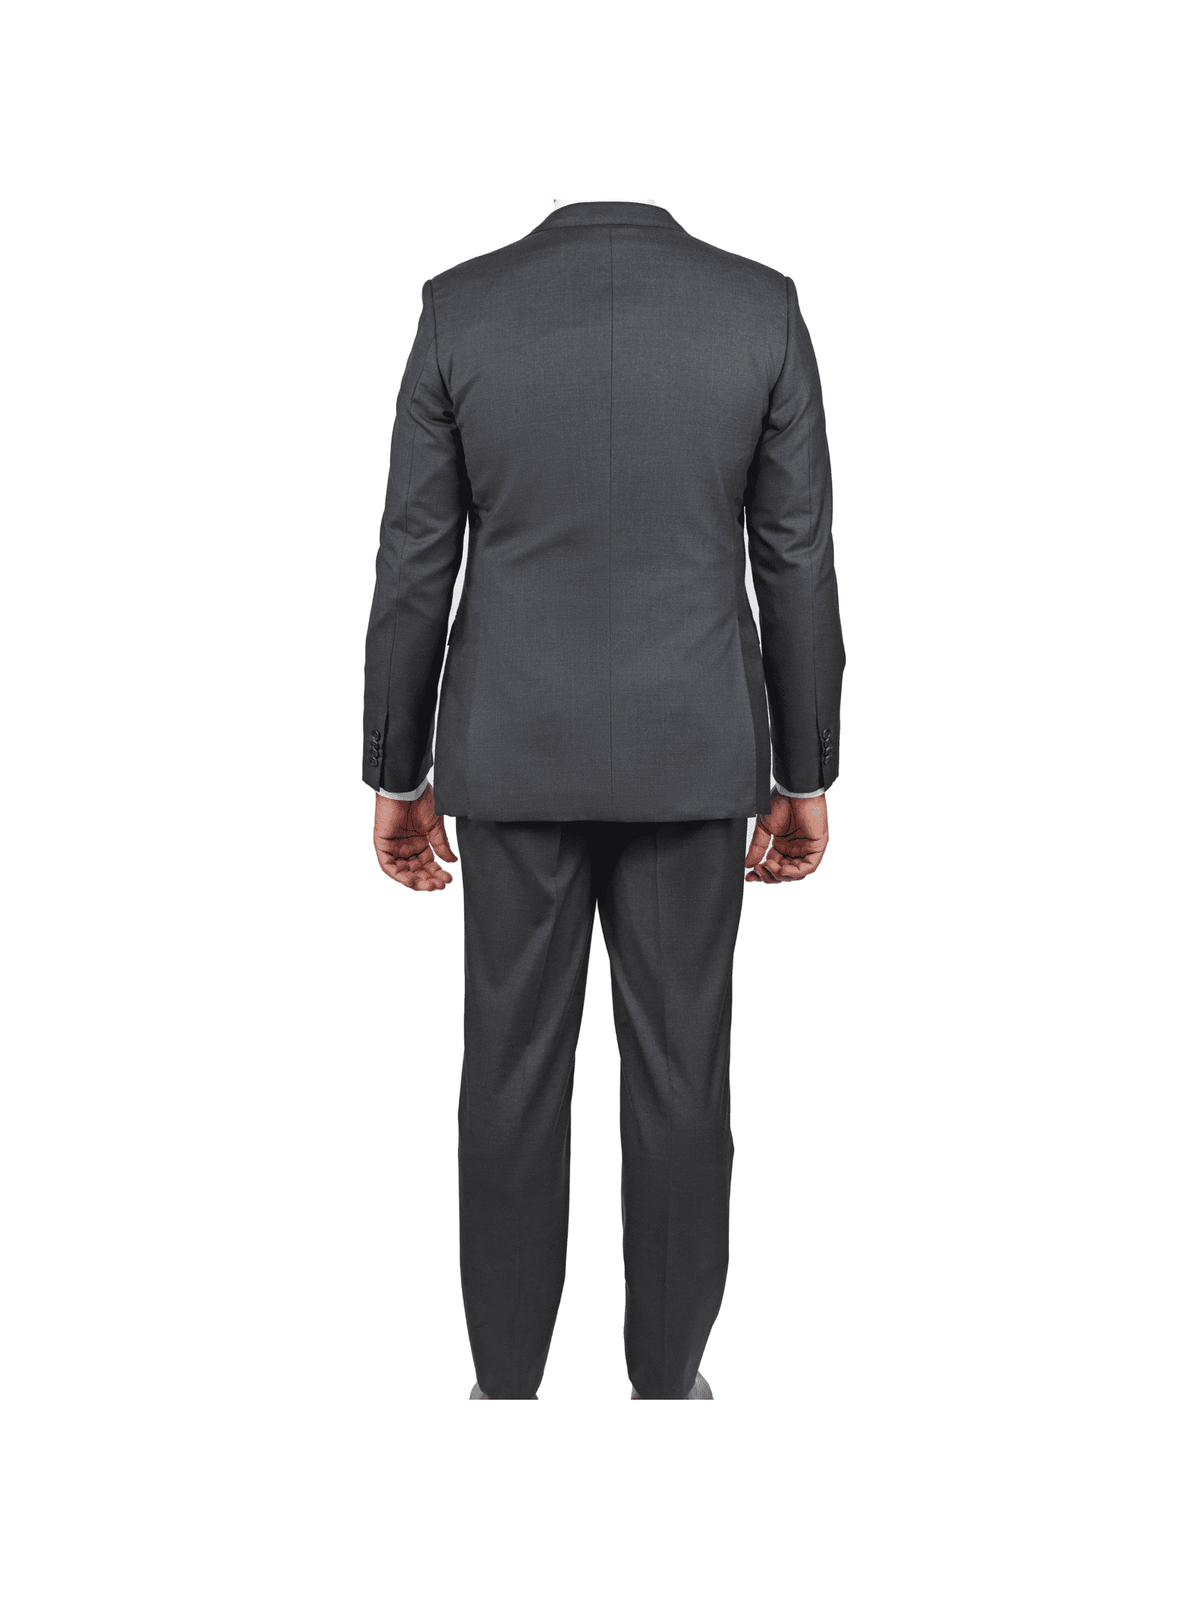 Blujacket SUITS Blujacket Mens Solid Charcoal Gray Wool Cashmere Trim Fit 2 Piece Suit